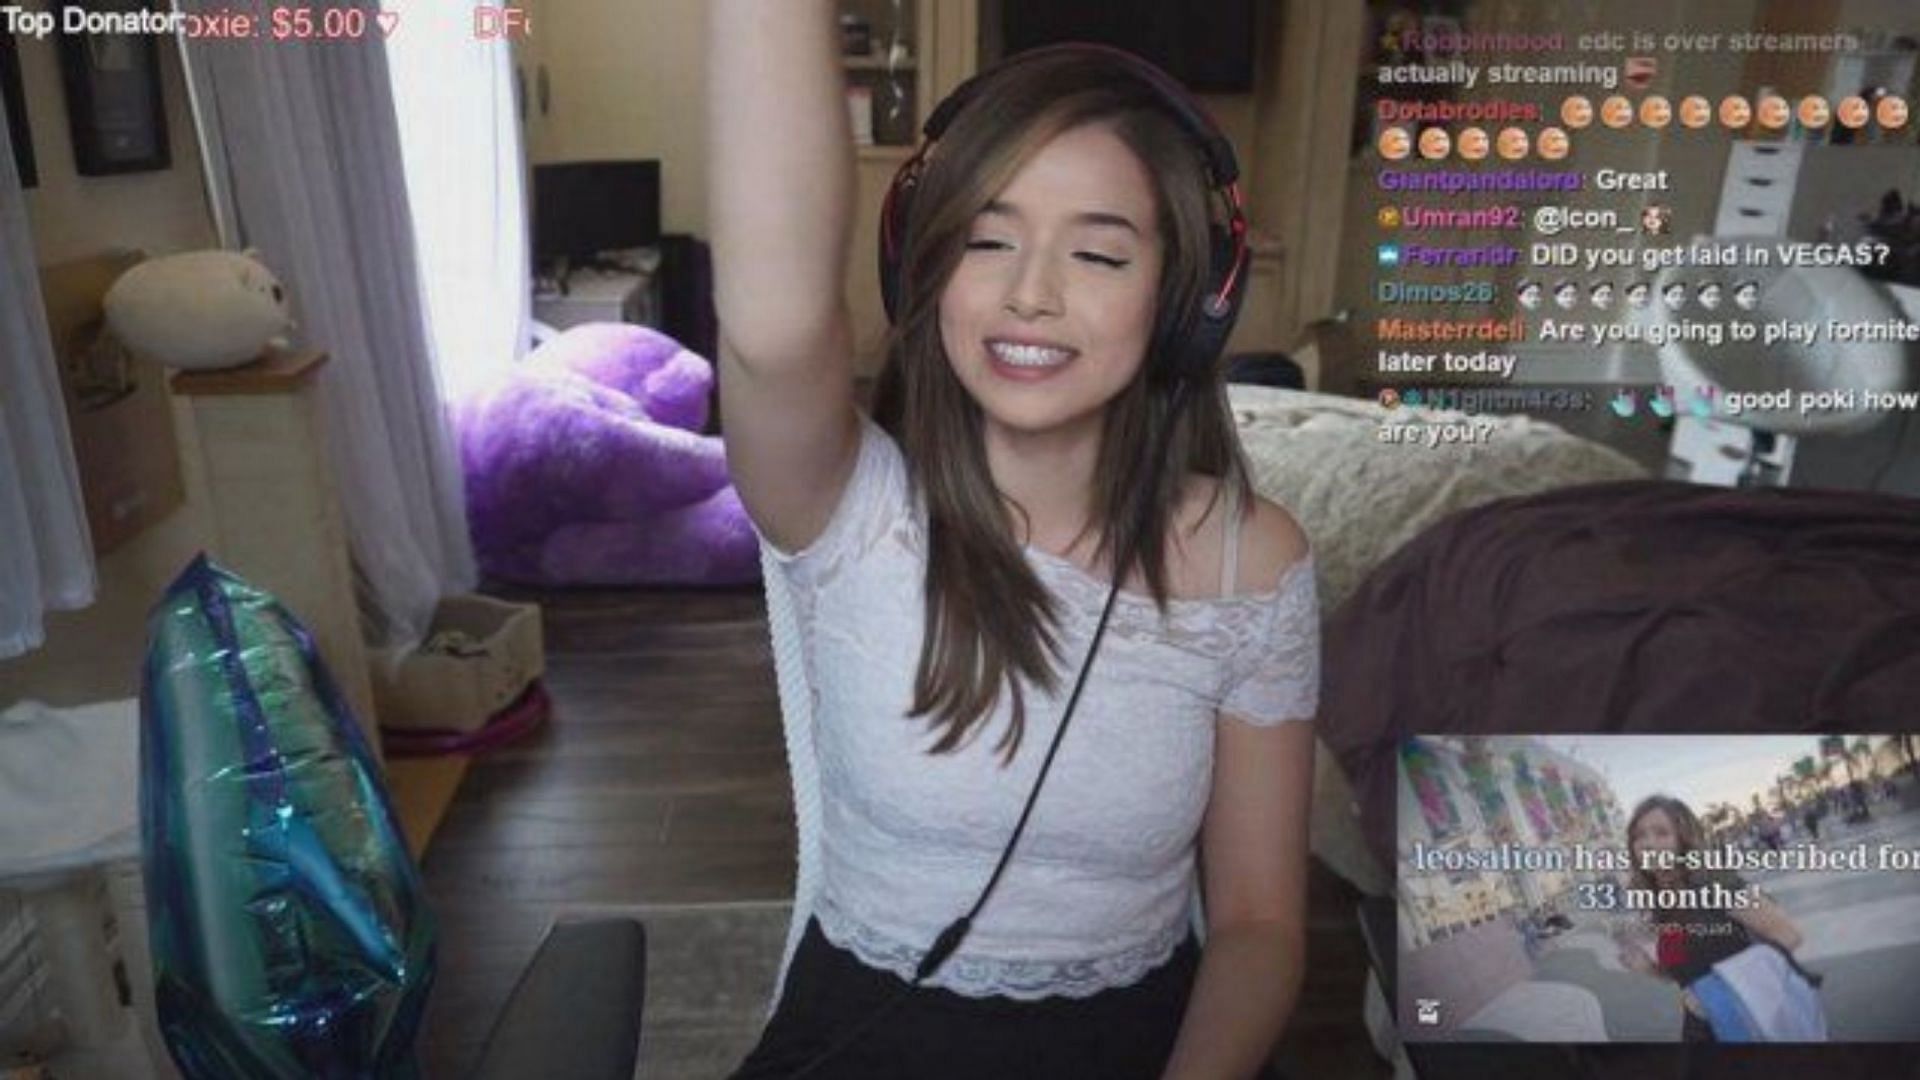 Pokimani announces the end of her Twitch contract (Image via Twitch/Pokimane)